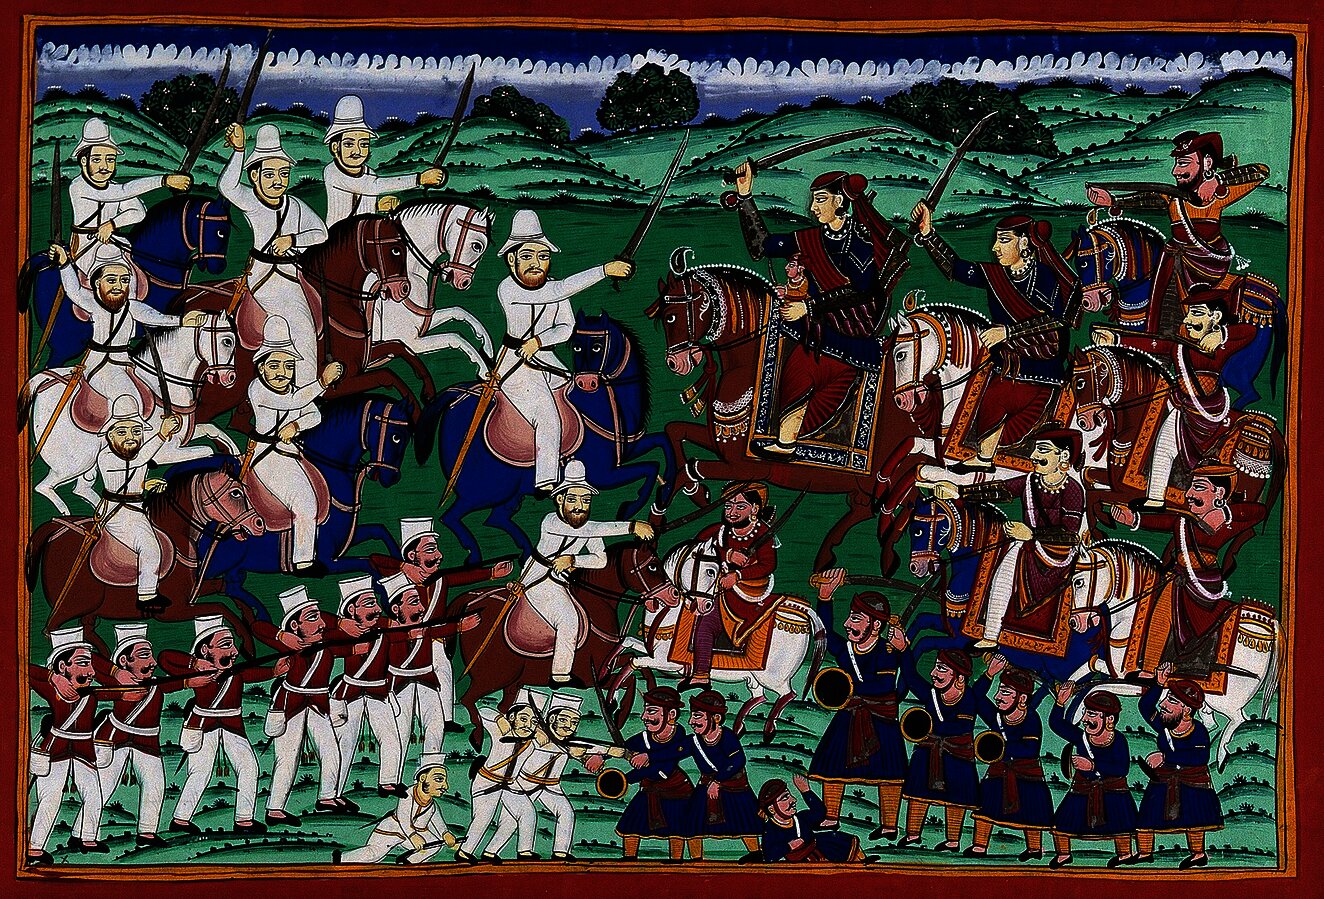 A colorful oil painting of The Rani of Jhansi leadings her troops on horseback